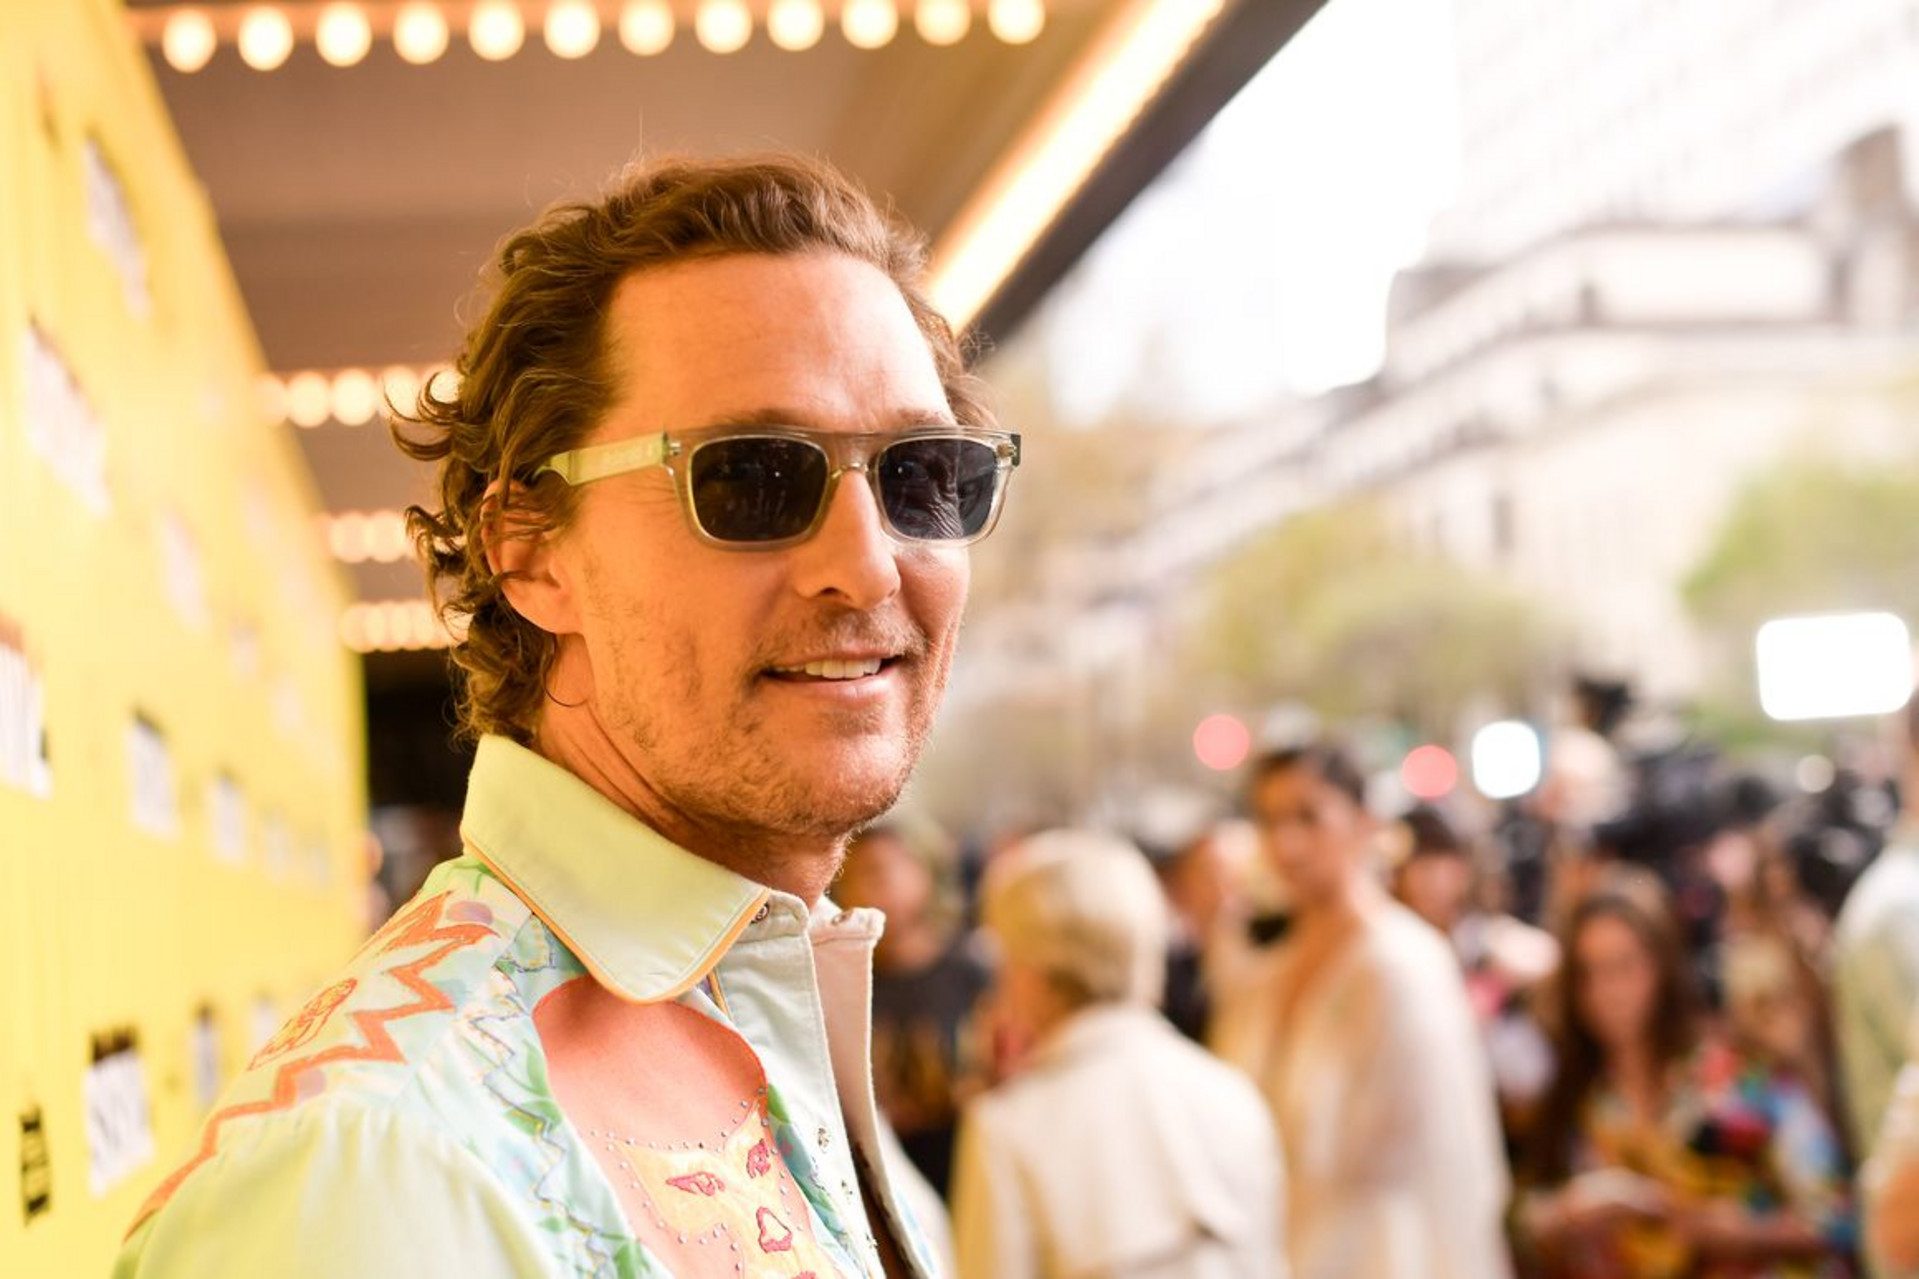 This week, several news outlets reported that actor, Matthew McConaughey, doesn't wear deodorant or cologne, because he prefers his natural scent. What are your thoughts on this? 